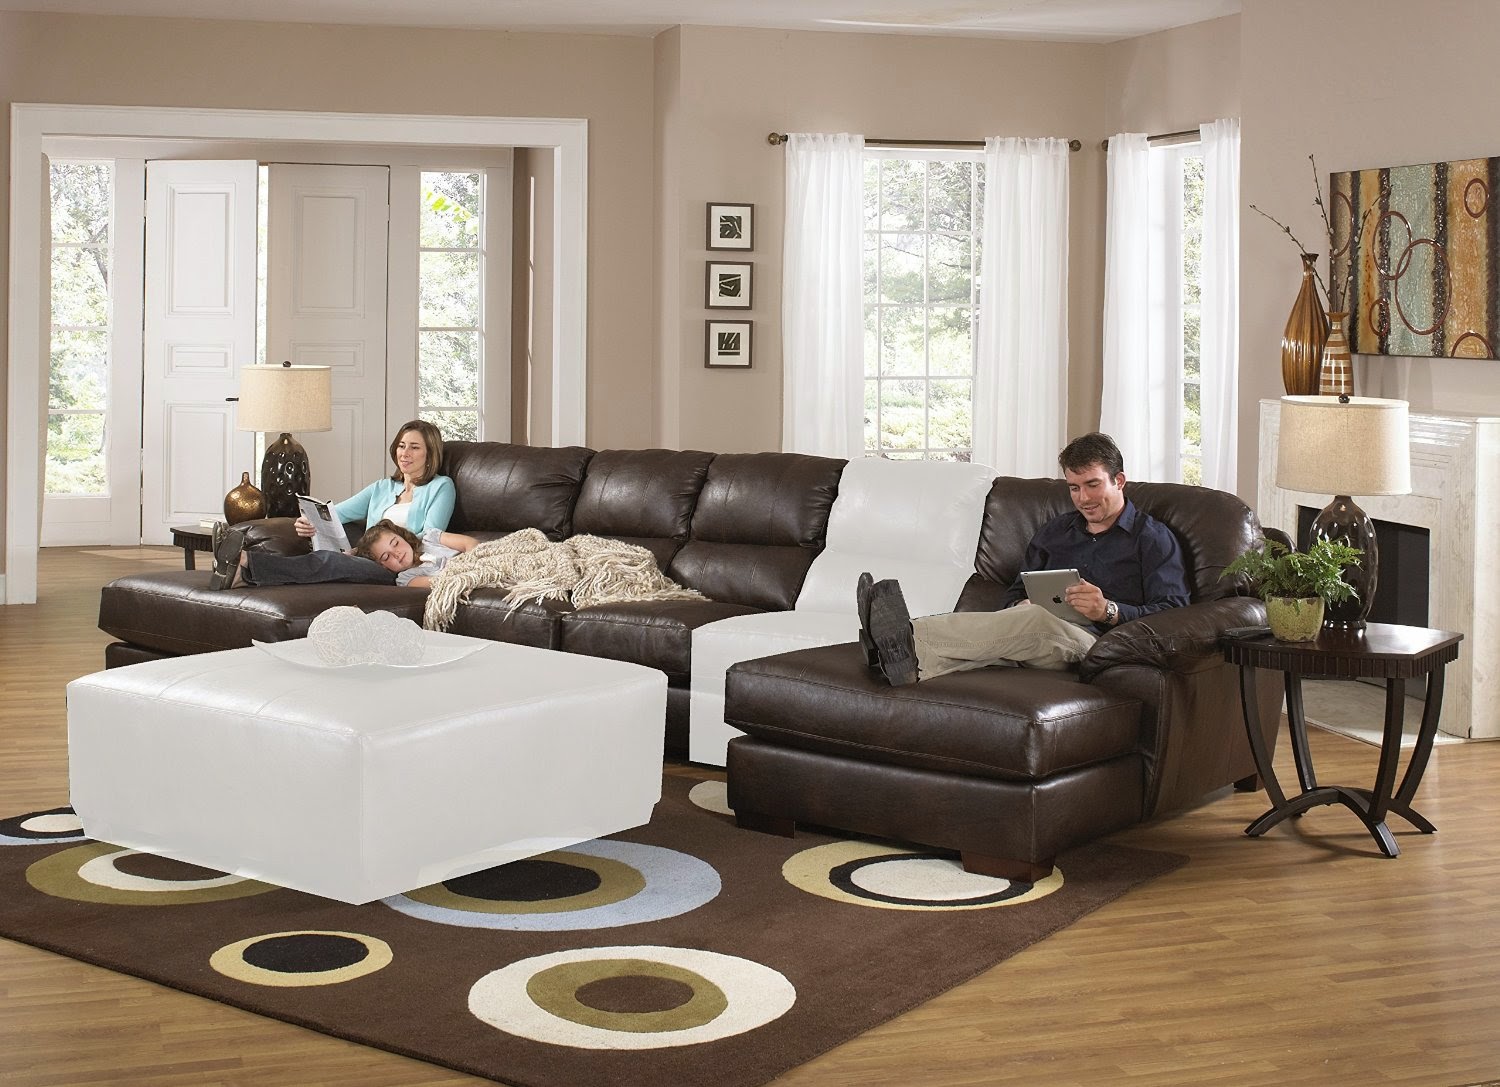 Sectional Reclining Sofas | Bonded Leather Sectional Sofa with Recliners | Recliner  Sectional Sofa